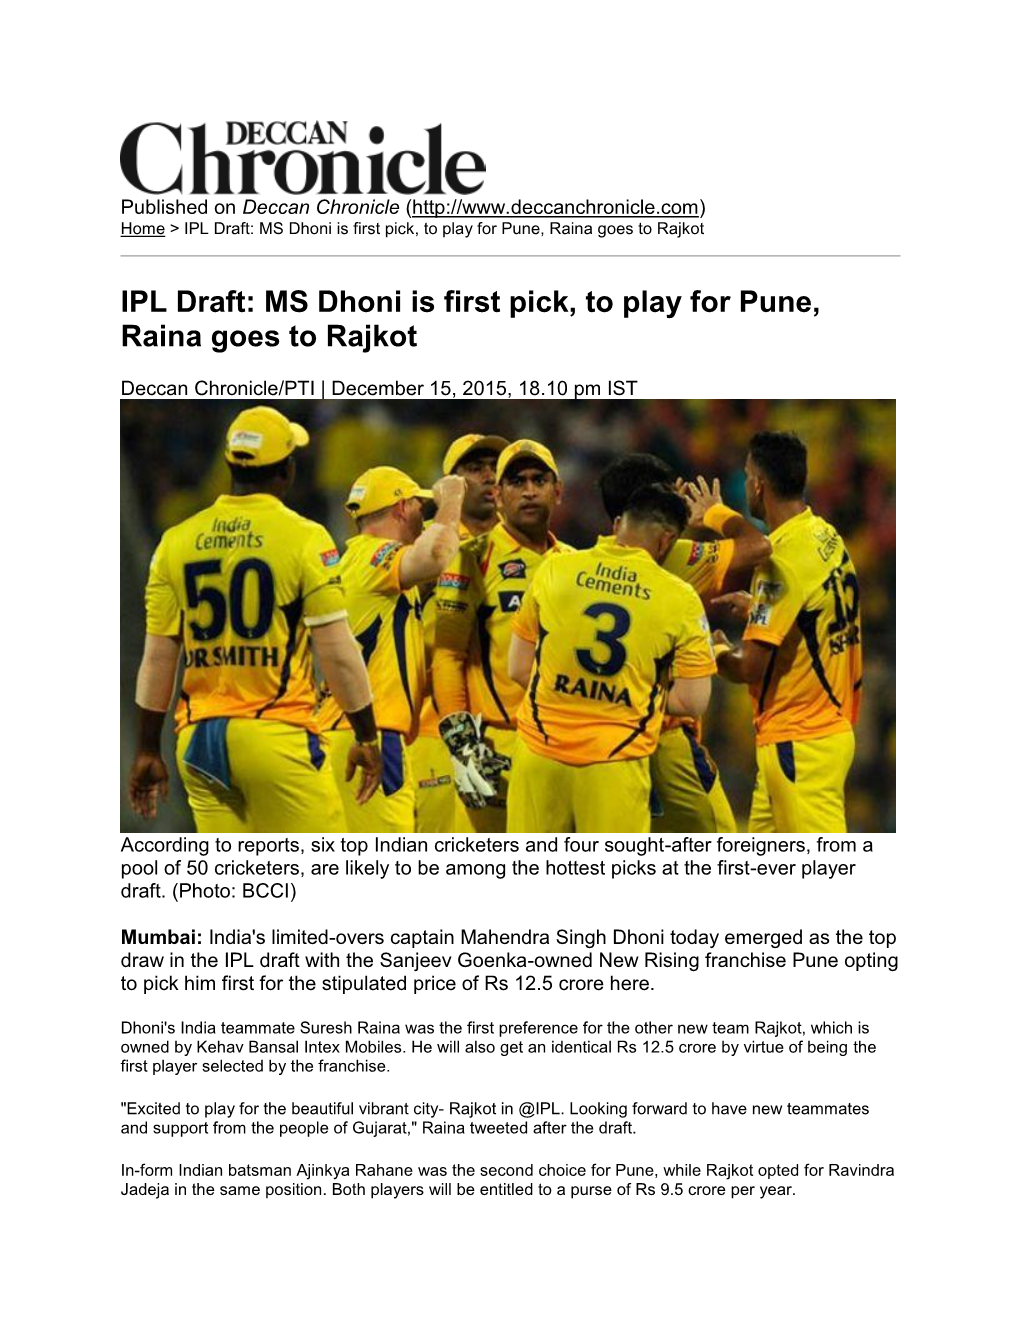 Deccan Chronicle ( Home > IPL Draft: MS Dhoni Is First Pick, to Play for Pune, Raina Goes to Rajkot